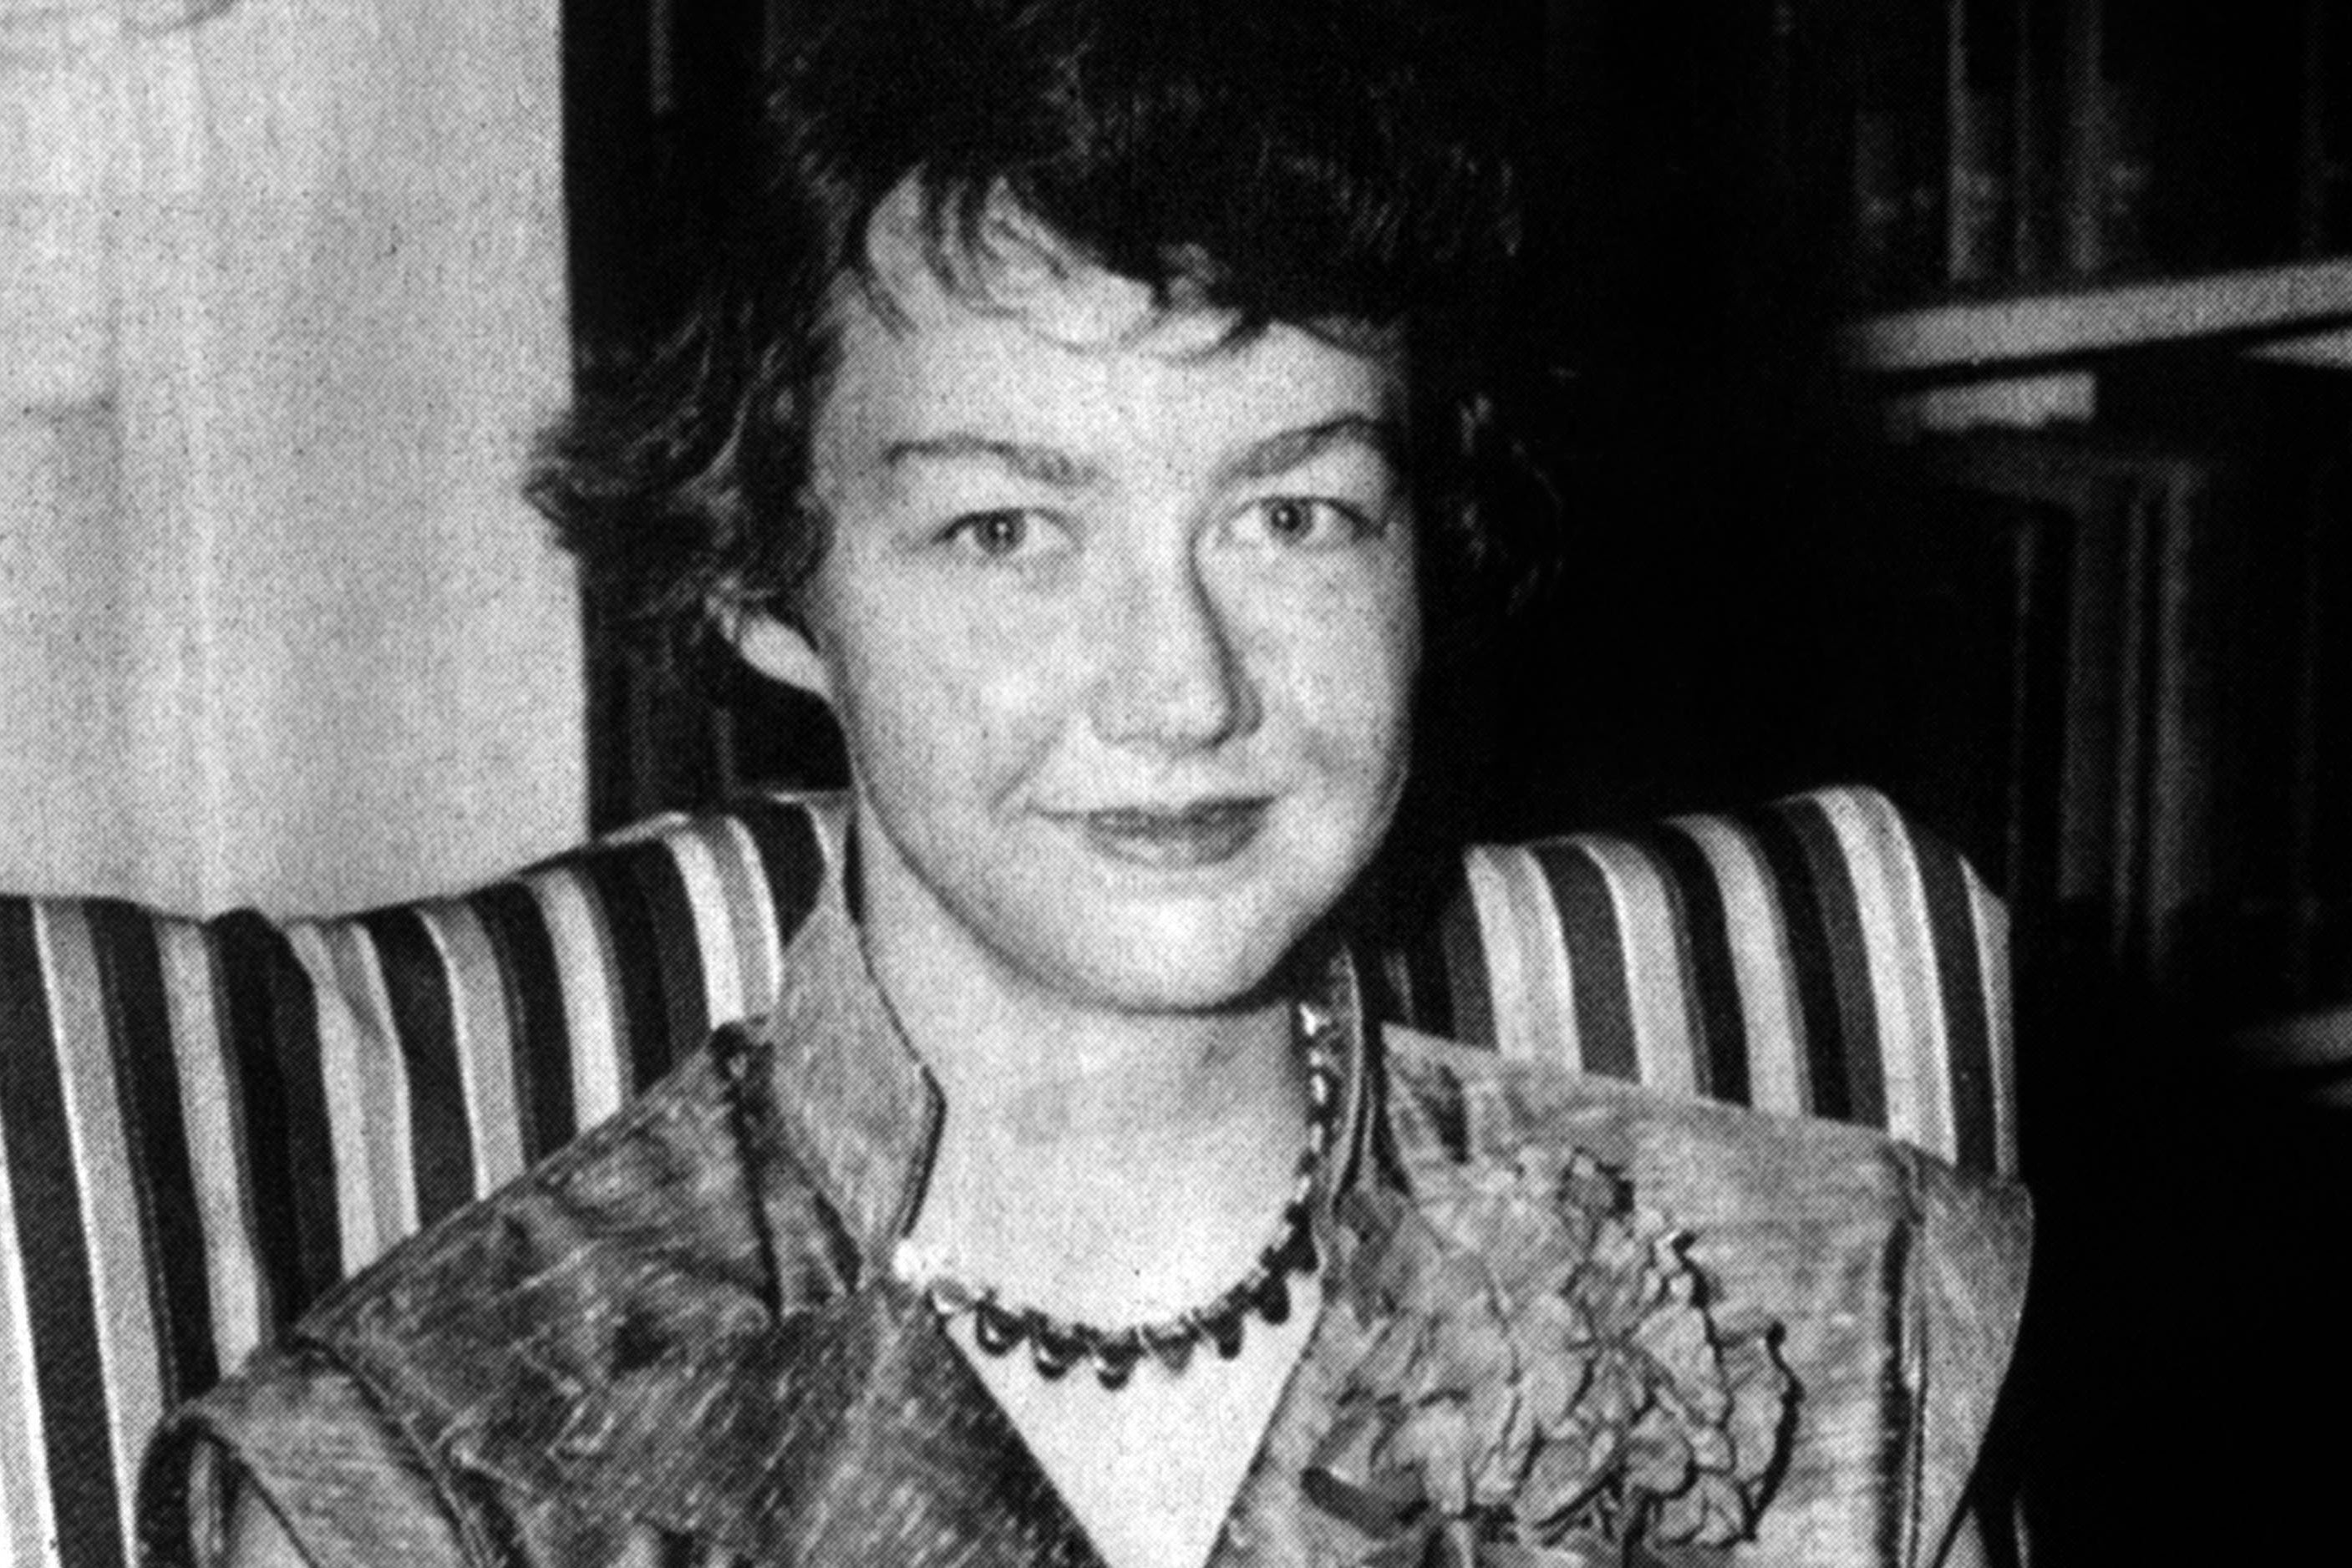 Flannery O'Connor in 1952, the year ‘Wise Blood’ was published